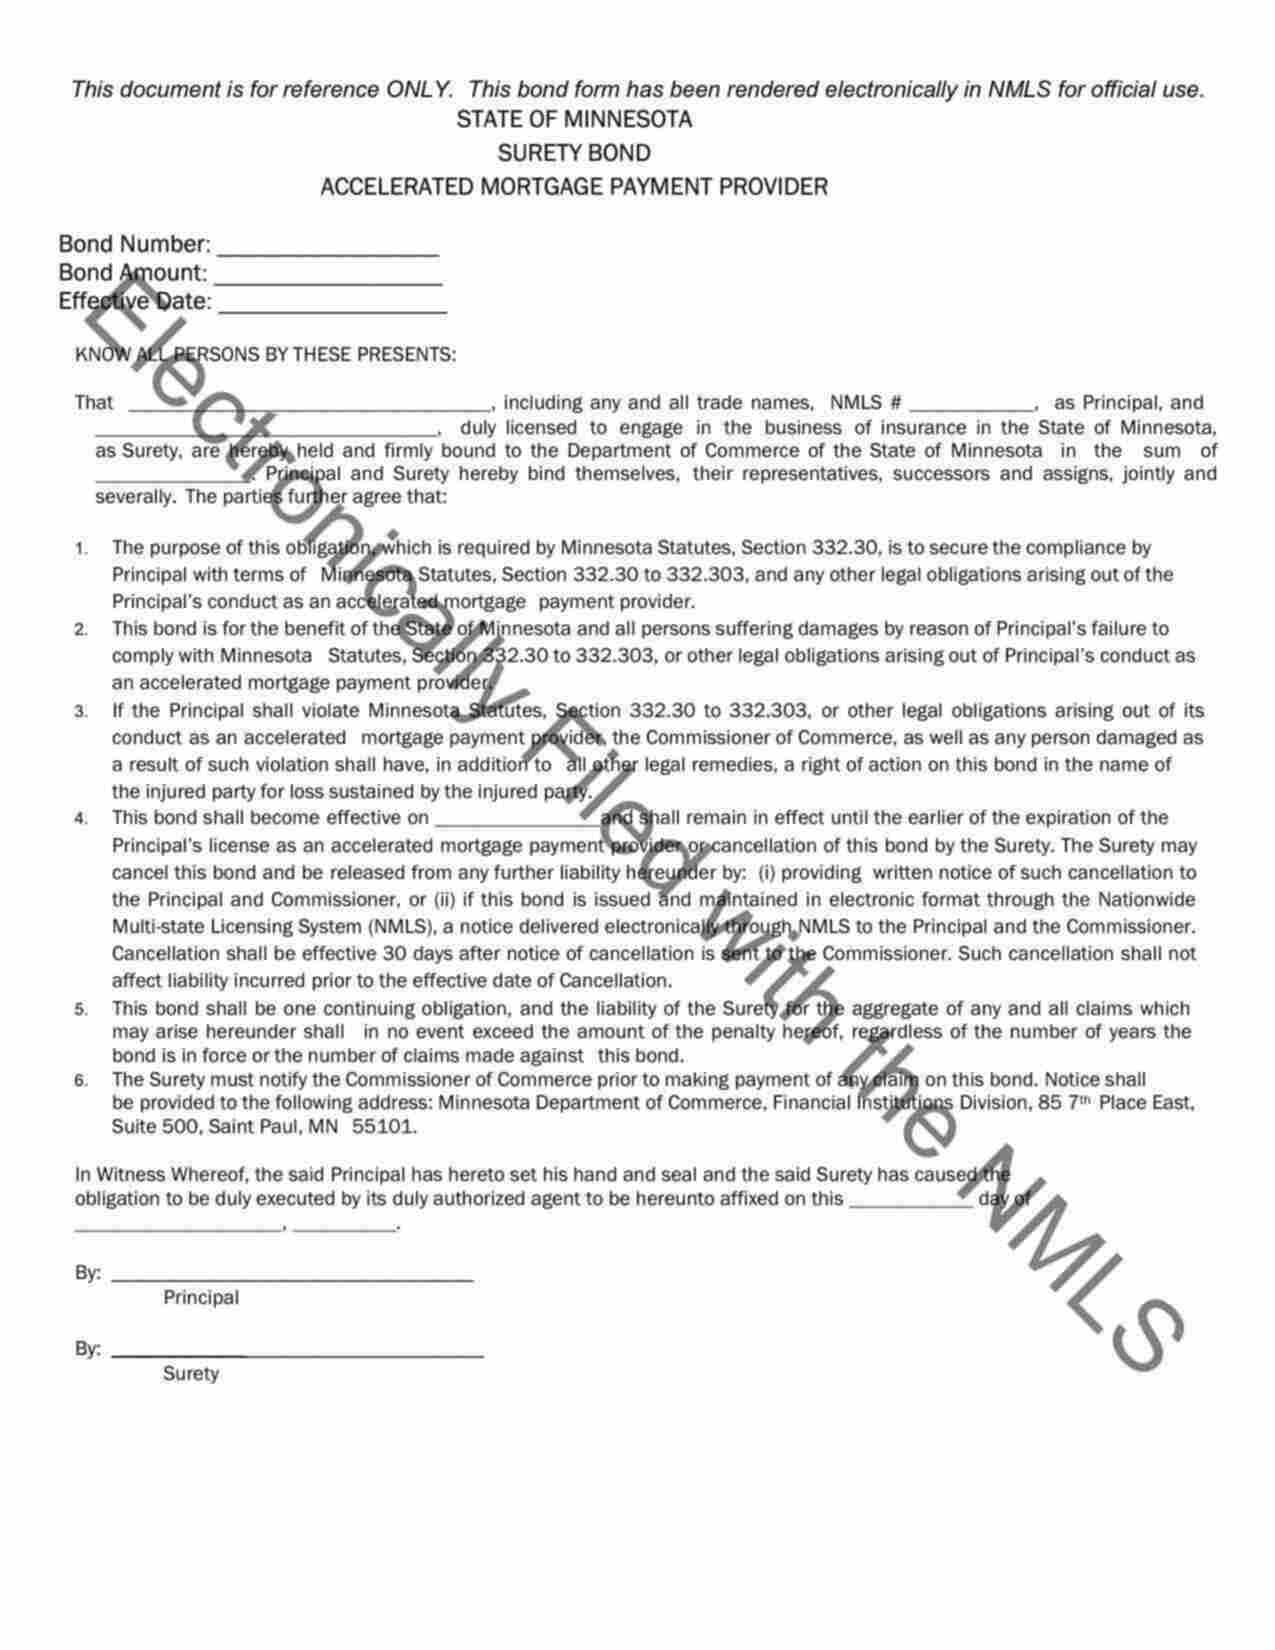 Minnesota Accelerated Mortgage Payment Provider Bond Form